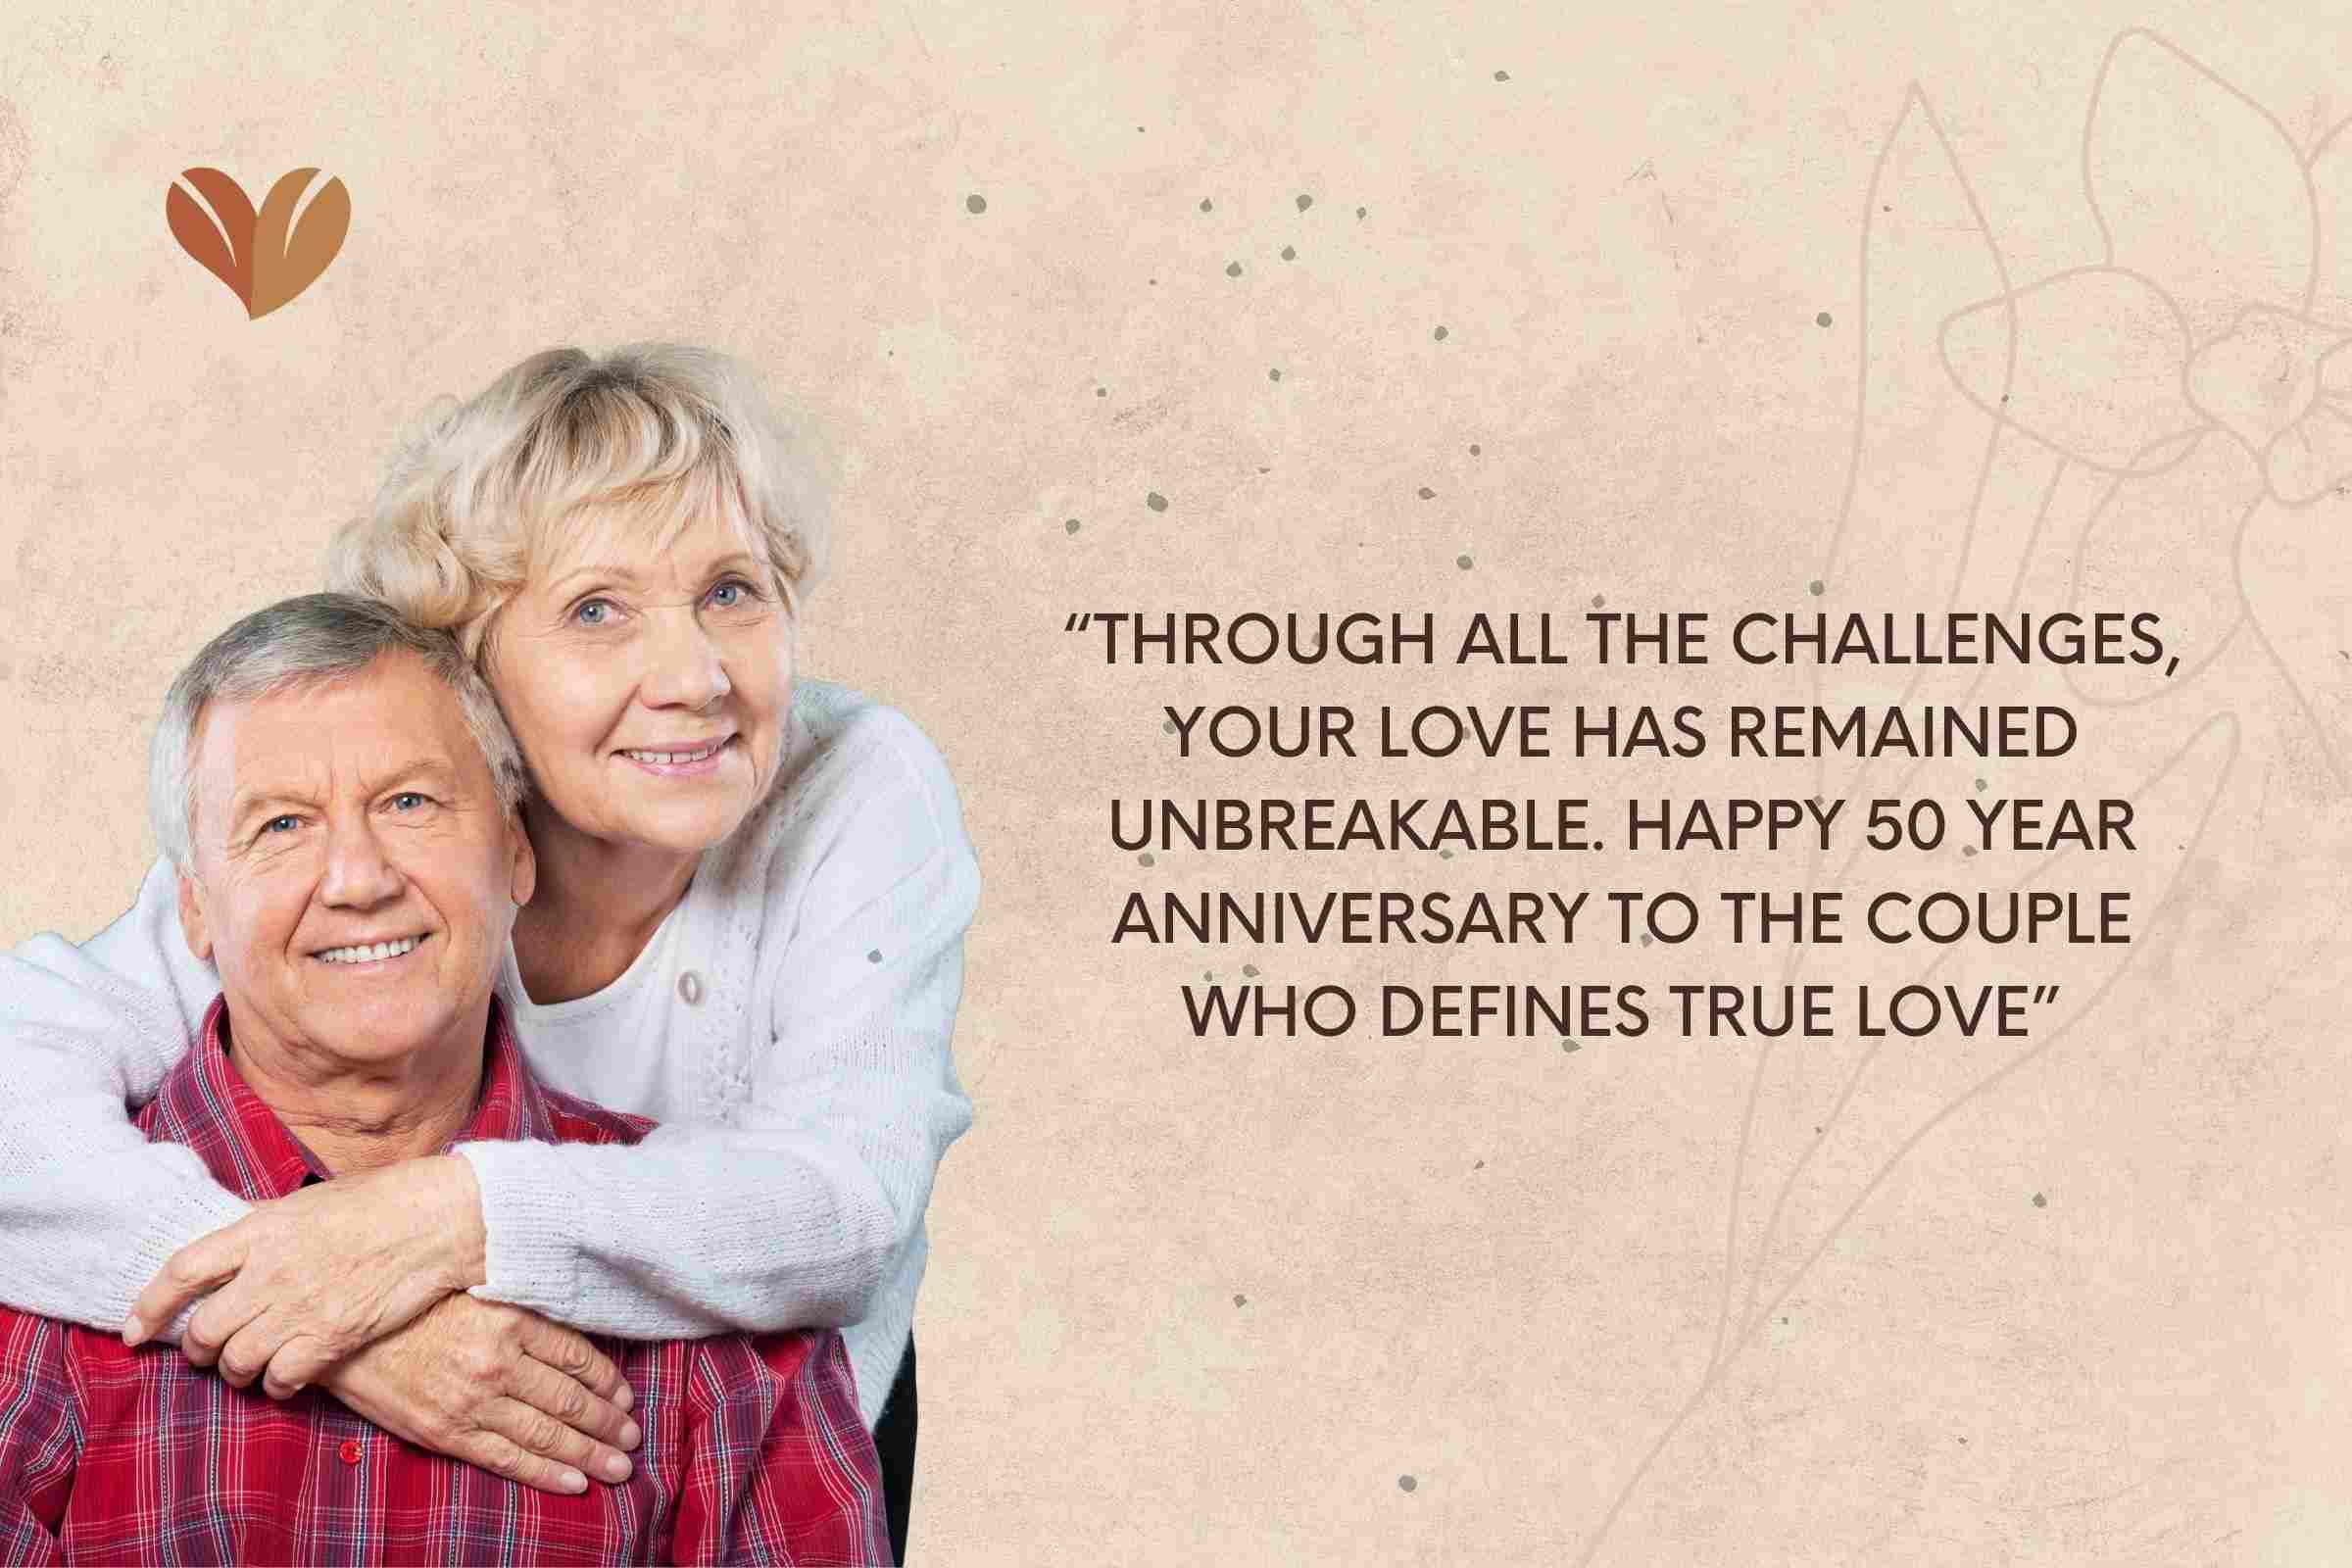 Through all the challenges, your love has remained unbreakable. Happy 50 year anniversary to the couple who defines true love.